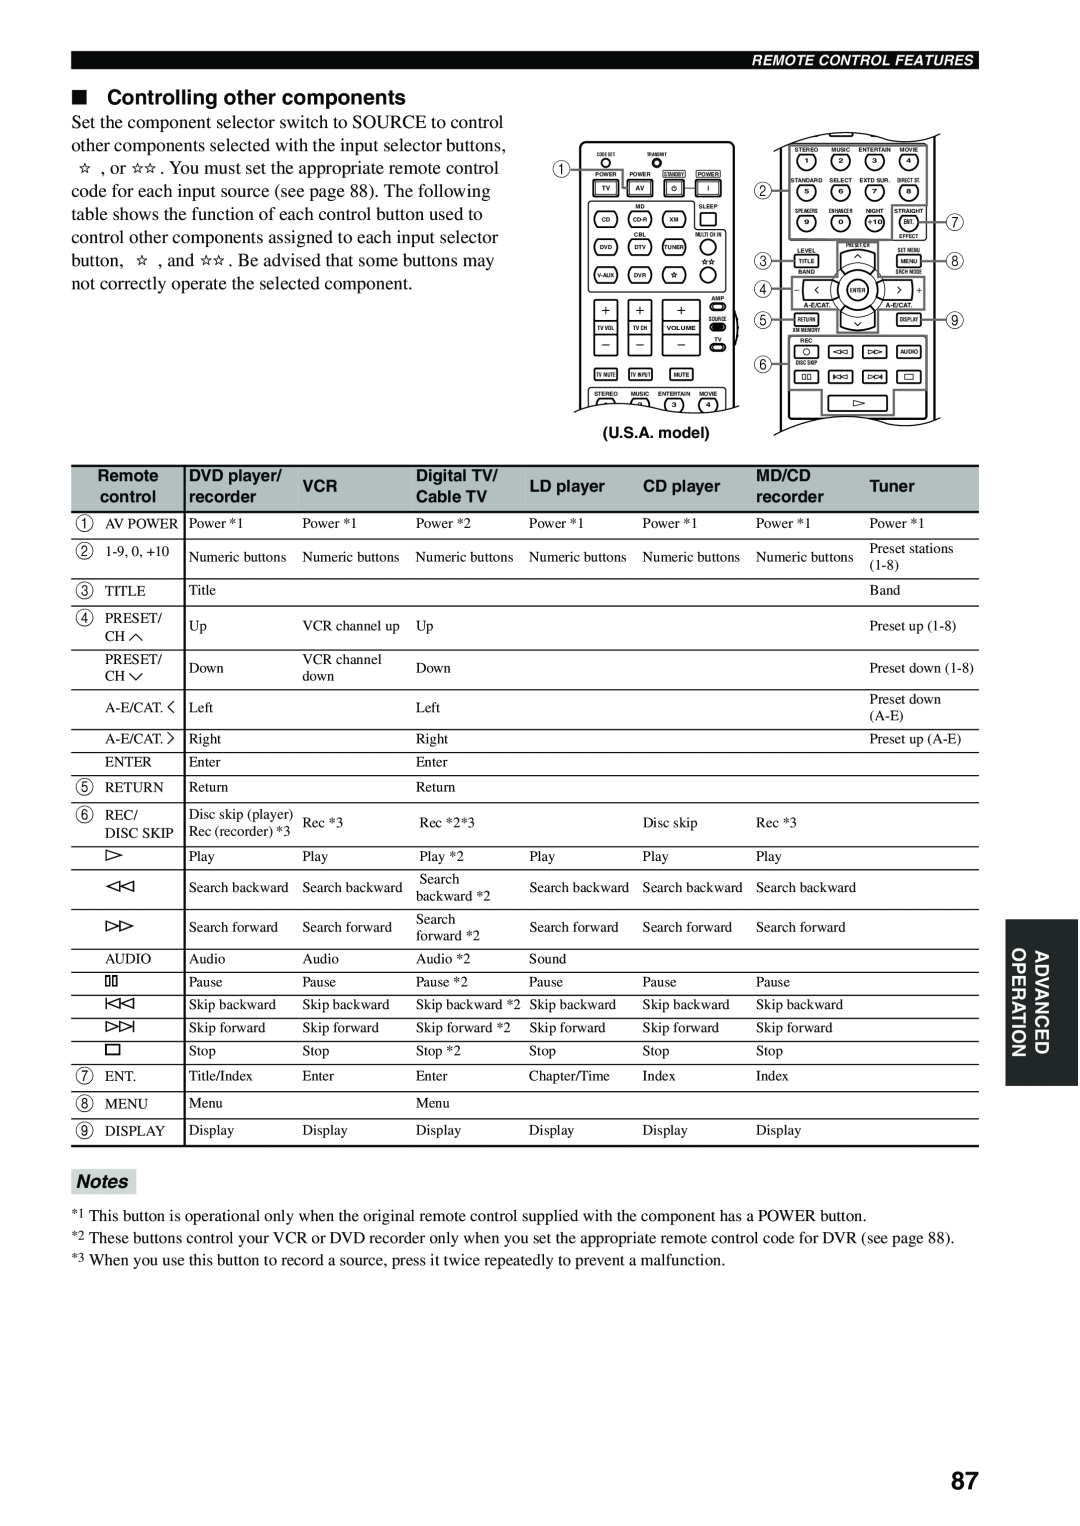 Yamaha HTR-5940 AV owner manual Controlling other components, You must set the appropriate remote control, button, Notes 